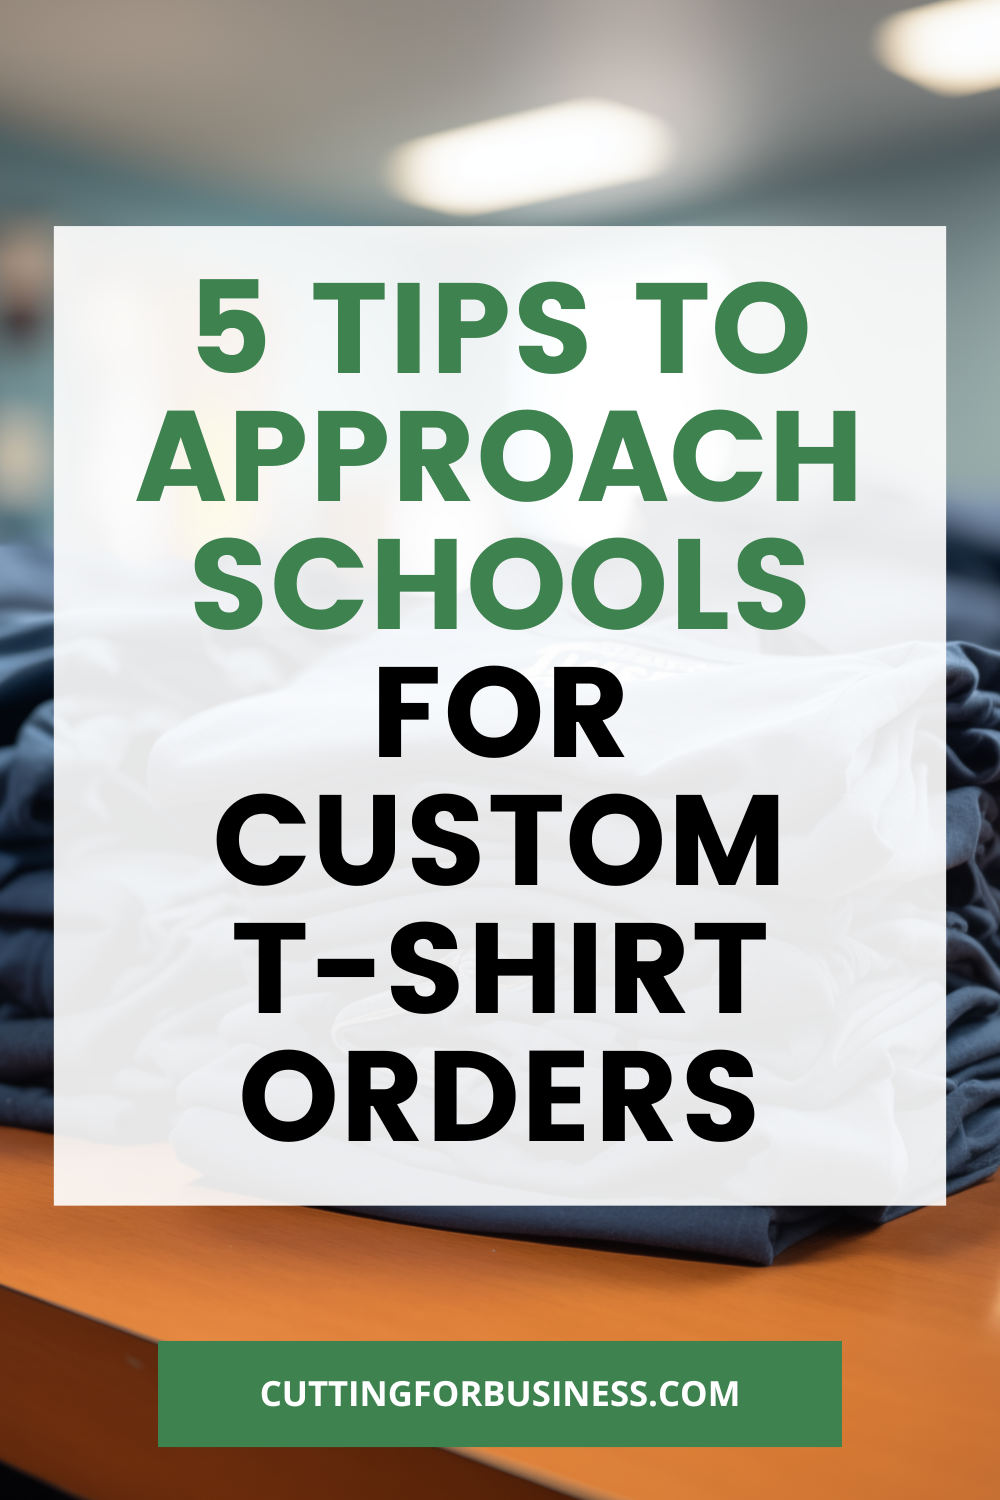 5 Tips to Approach Schools for Custom T-Shirt Orders - cuttingforbusiness.com